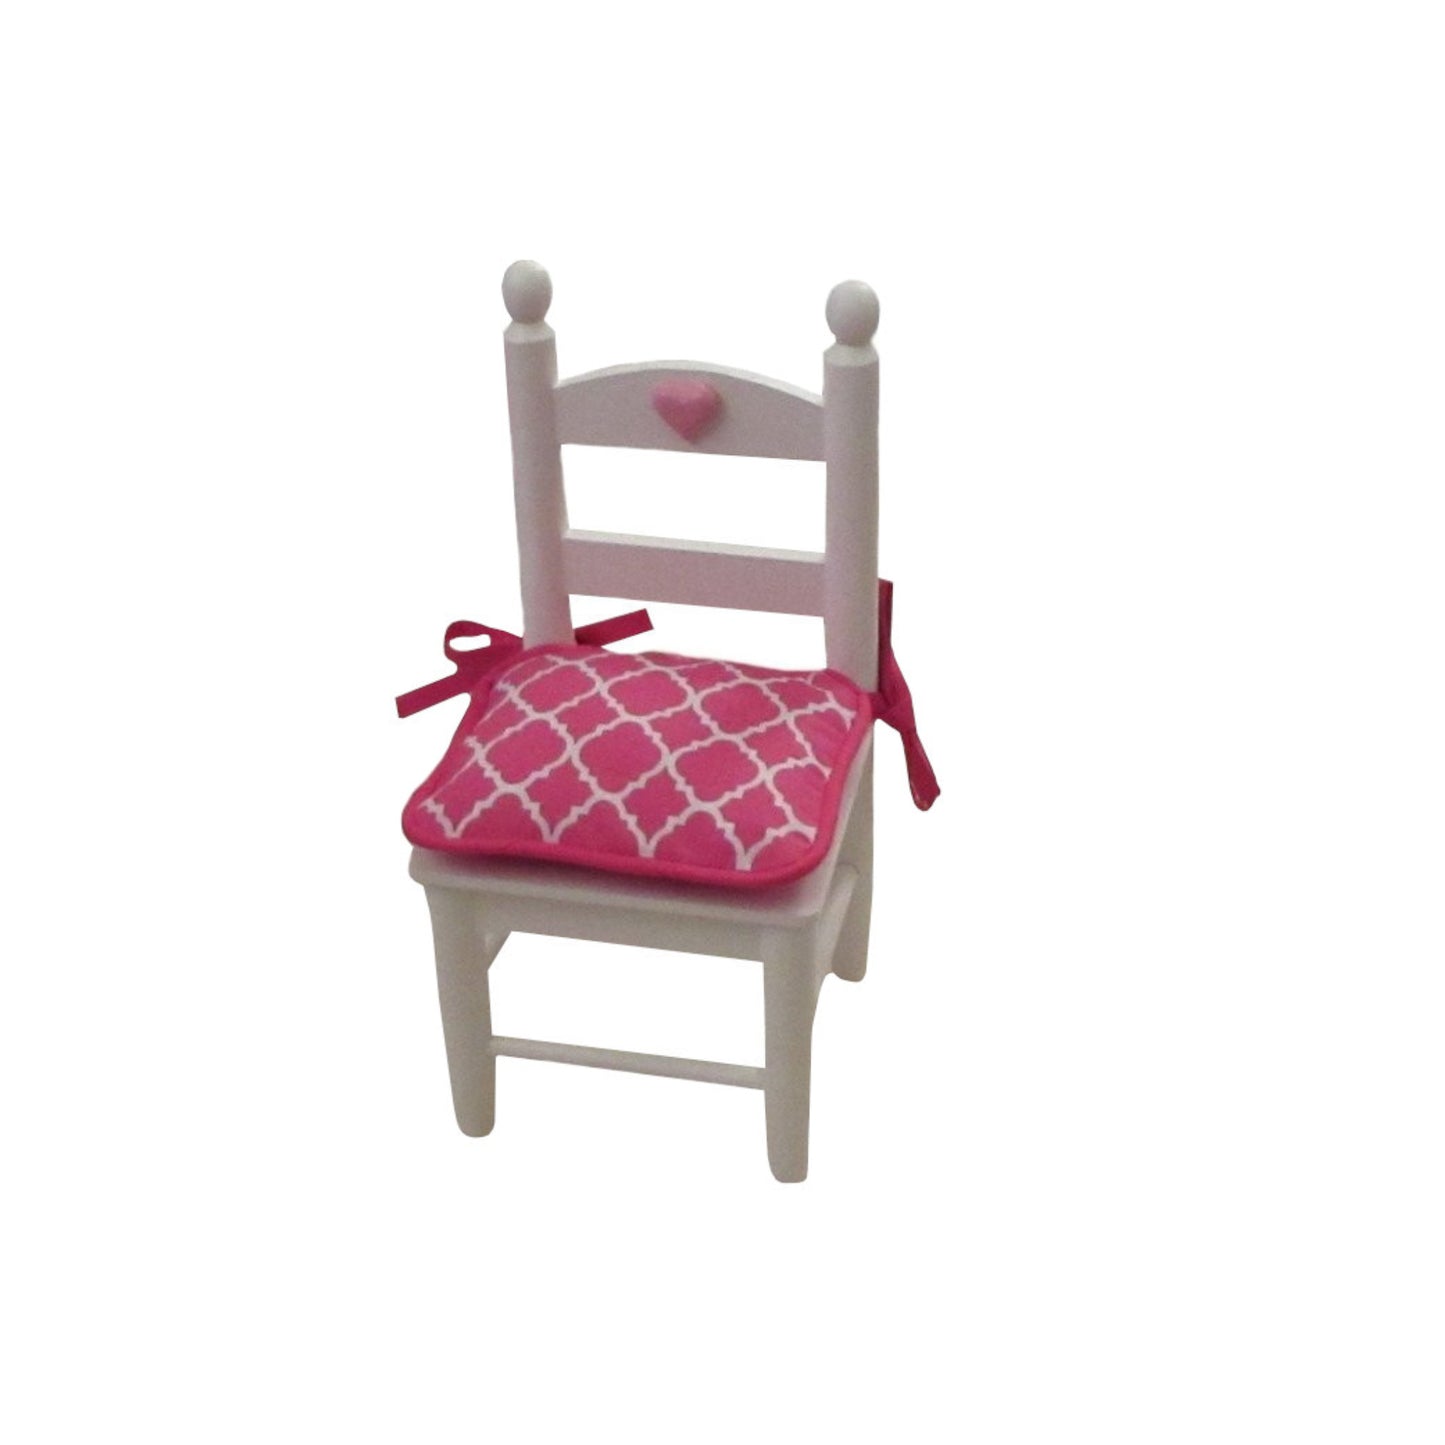 Pink and White Print Doll Chair Cushion for 18-inch dolls